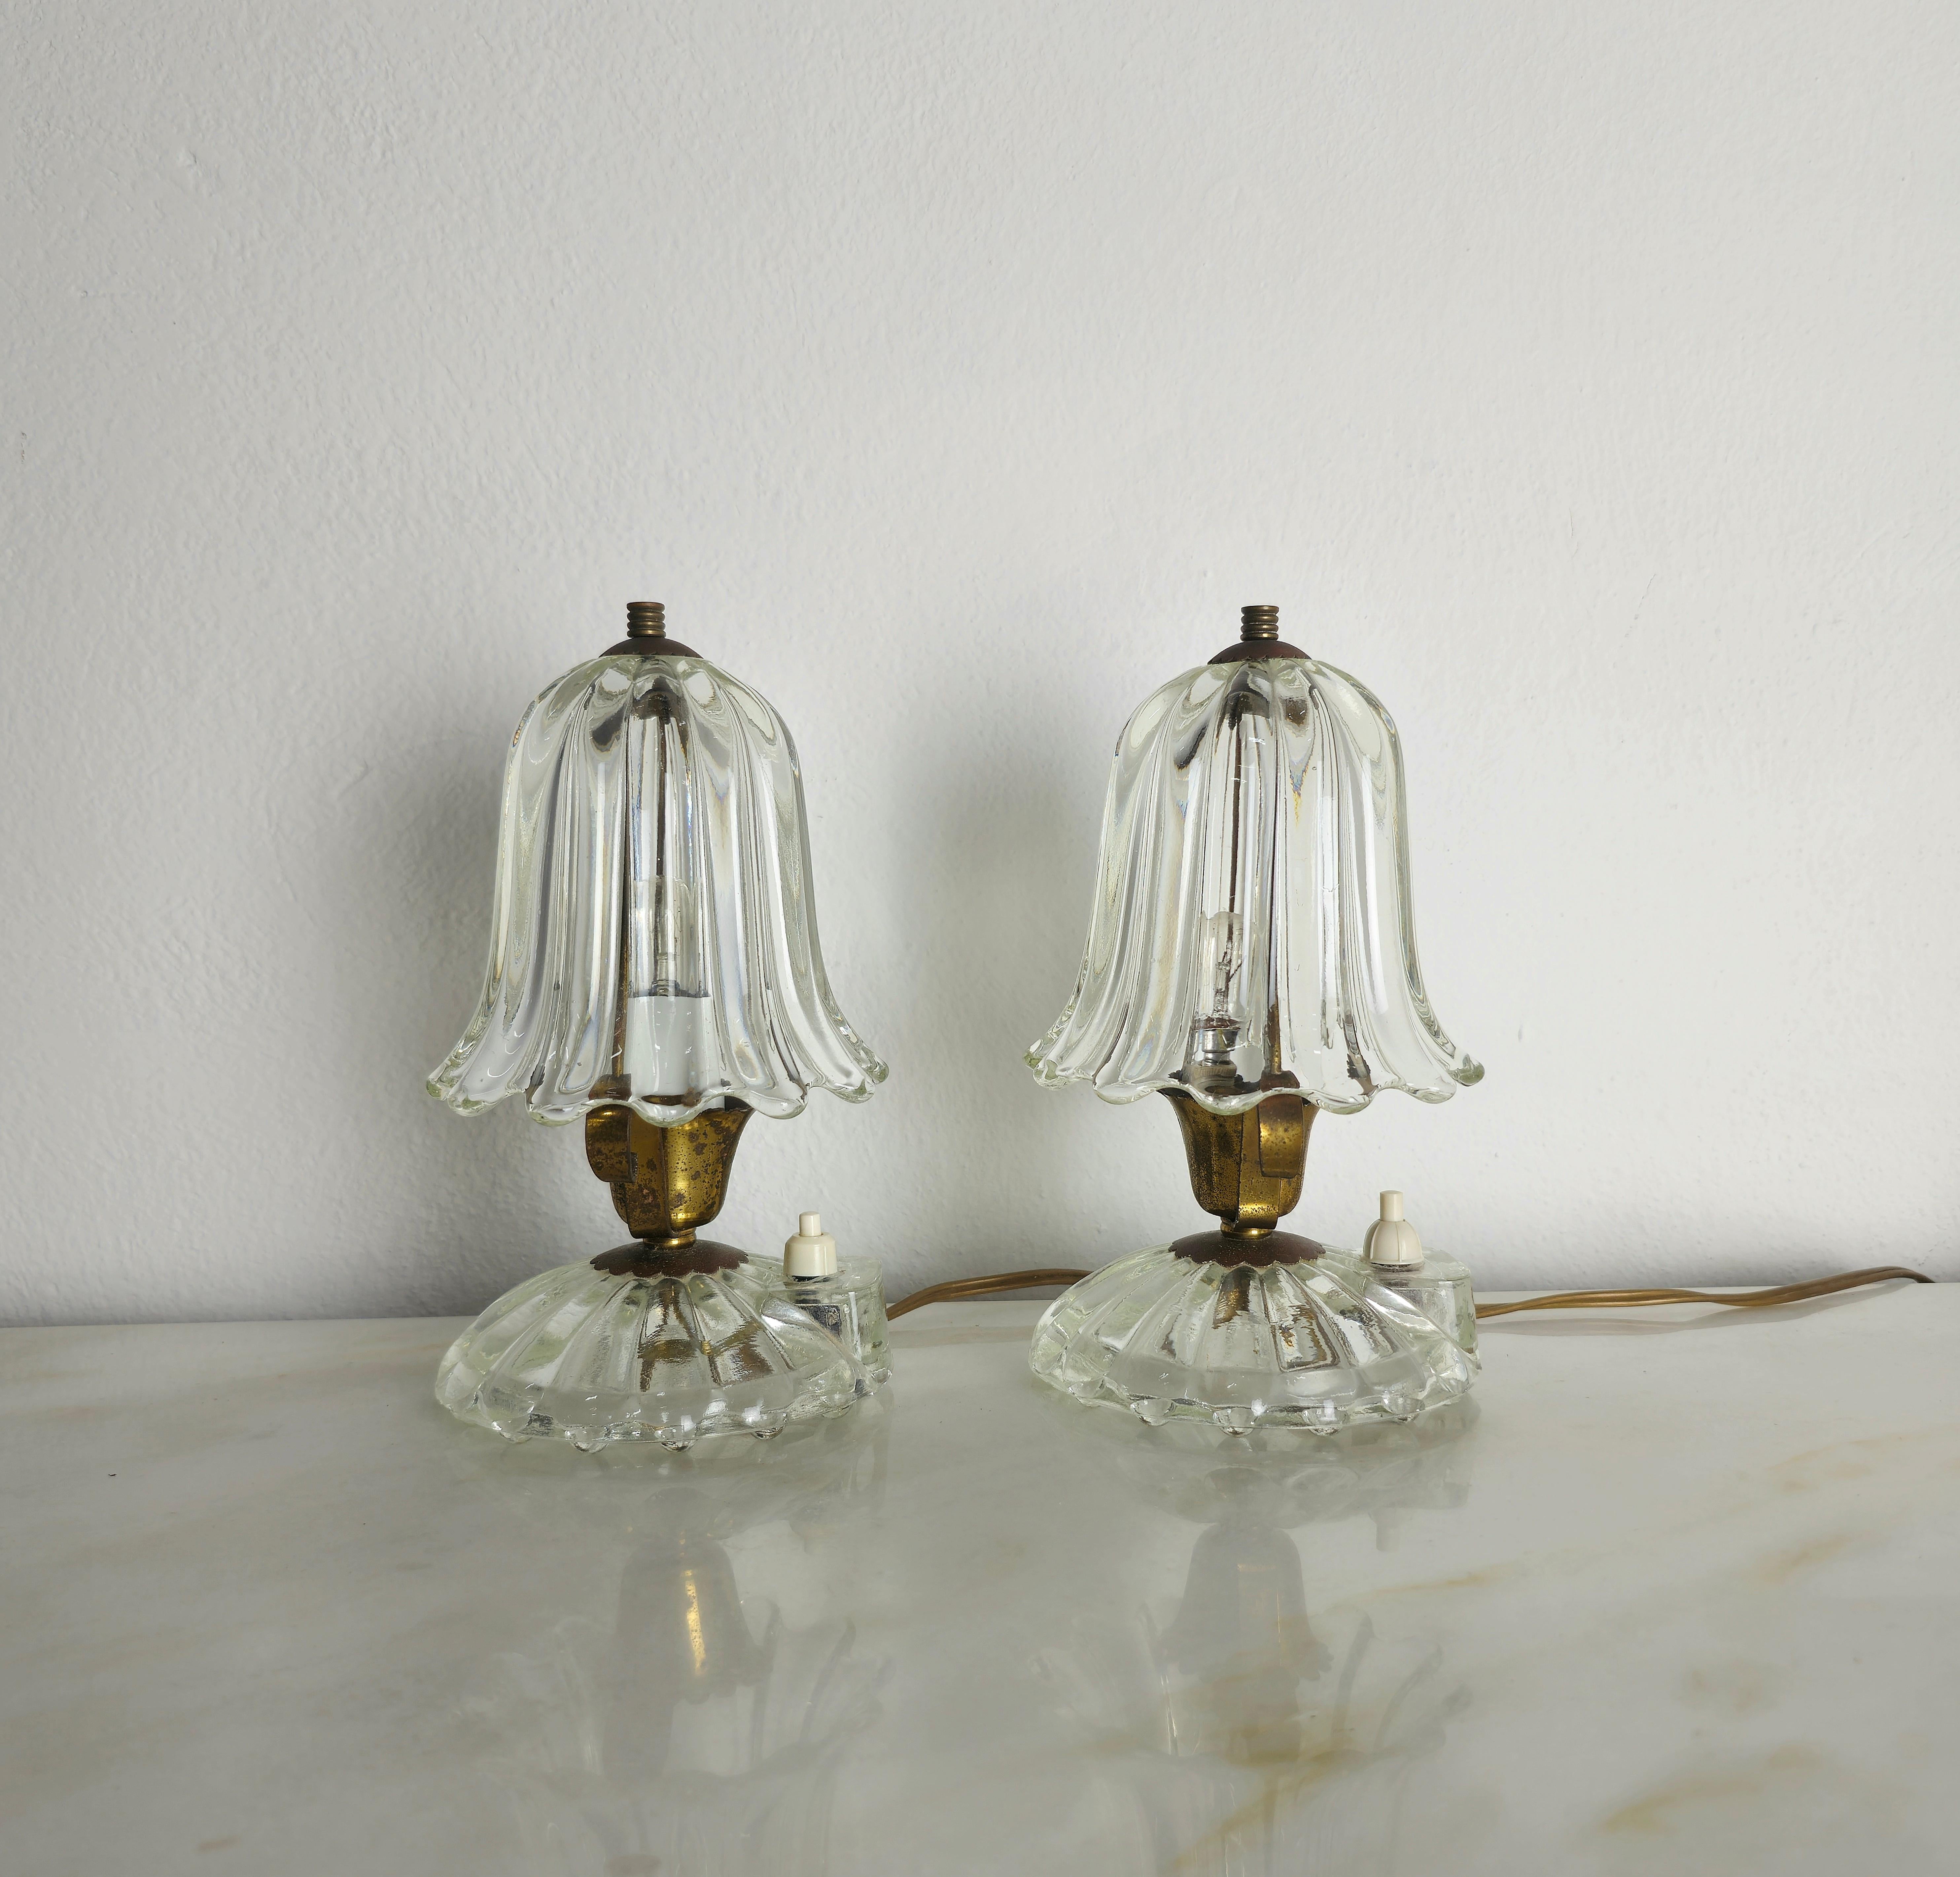 Pair of Table Lamps Murano Glass Brass Barovier&Toso Midcentury Italy 1940s 3